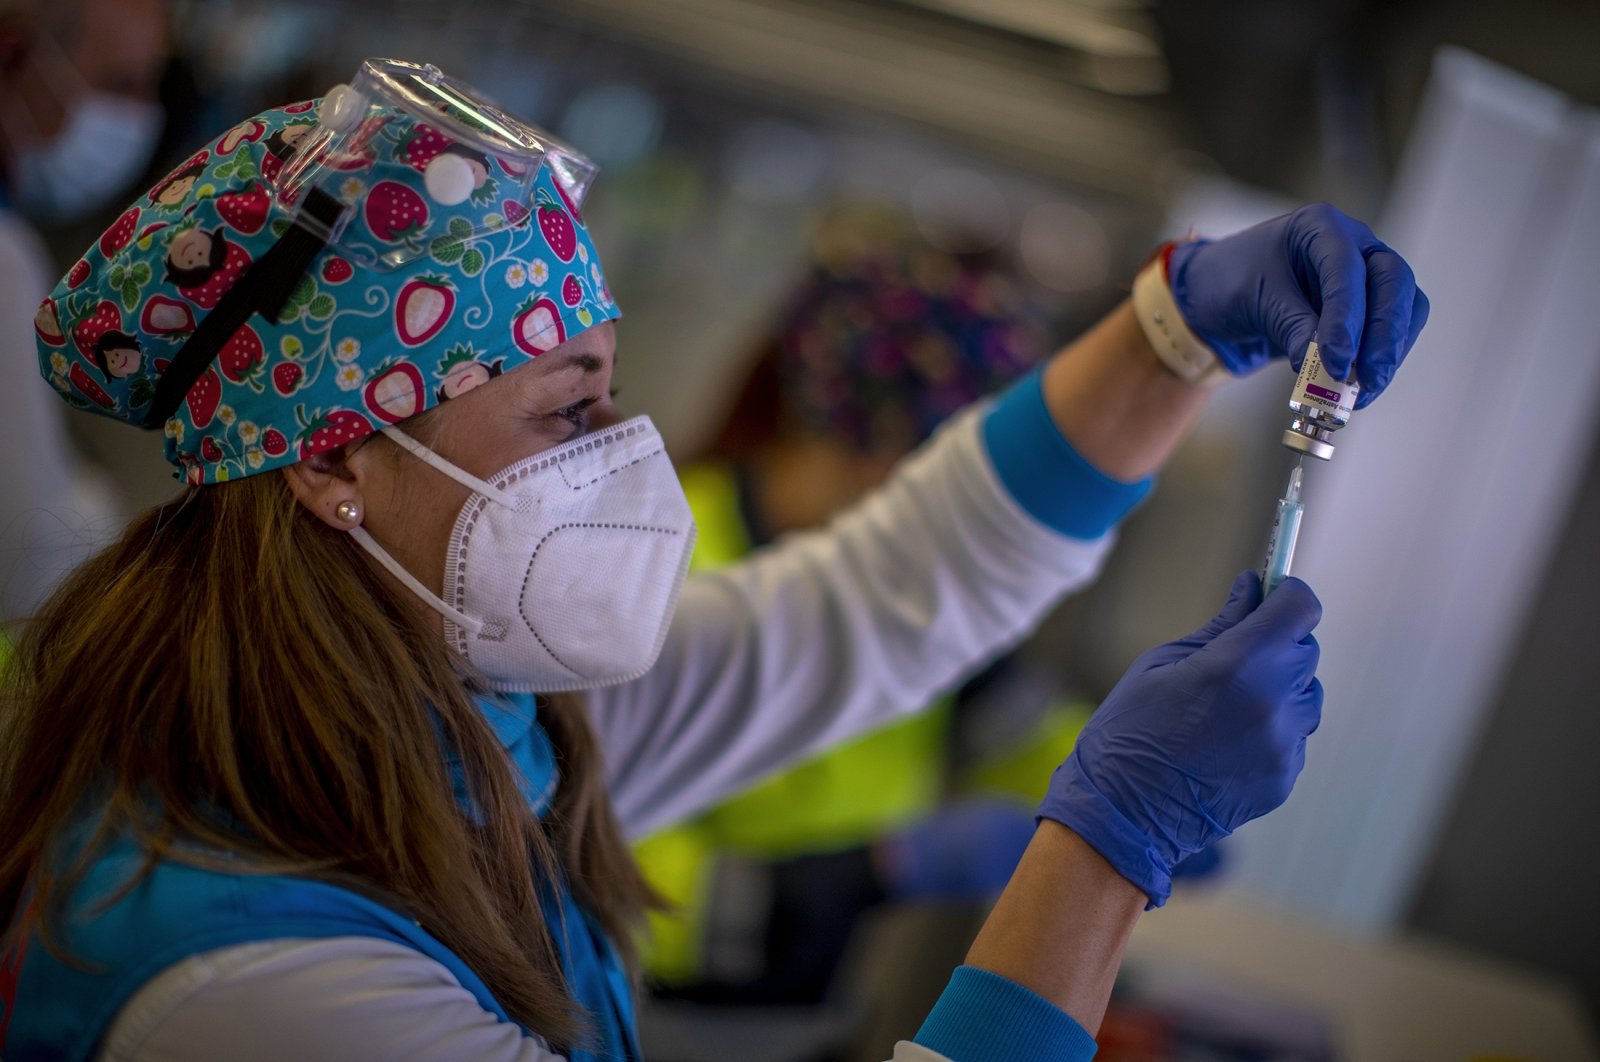 A health worker holds a vial of AstraZeneca vaccine to be administered to emergency services personnel during a mass COVID-19 vaccination campaign at Wanda Metropolitano stadium in Madrid, Spain, Feb. 25, 2021. (AP Photo)